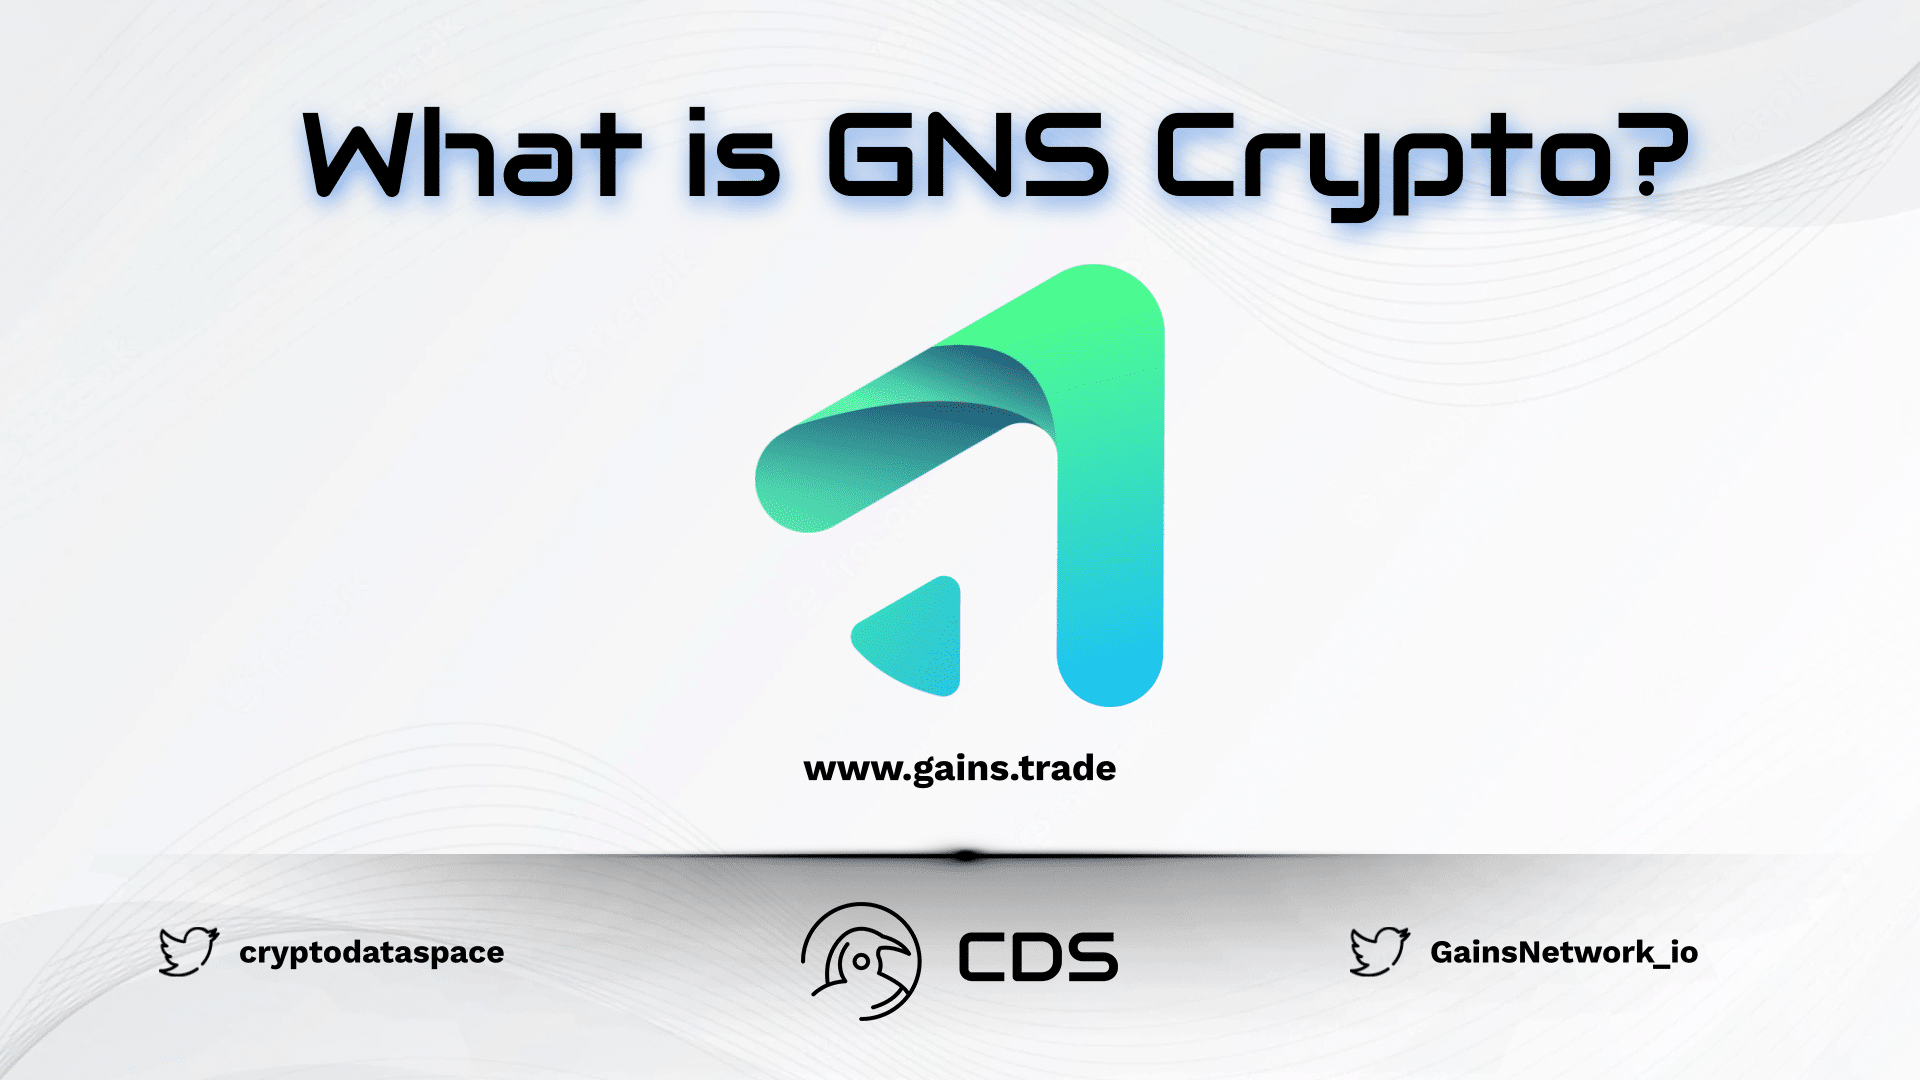 What is GNS Crypto?